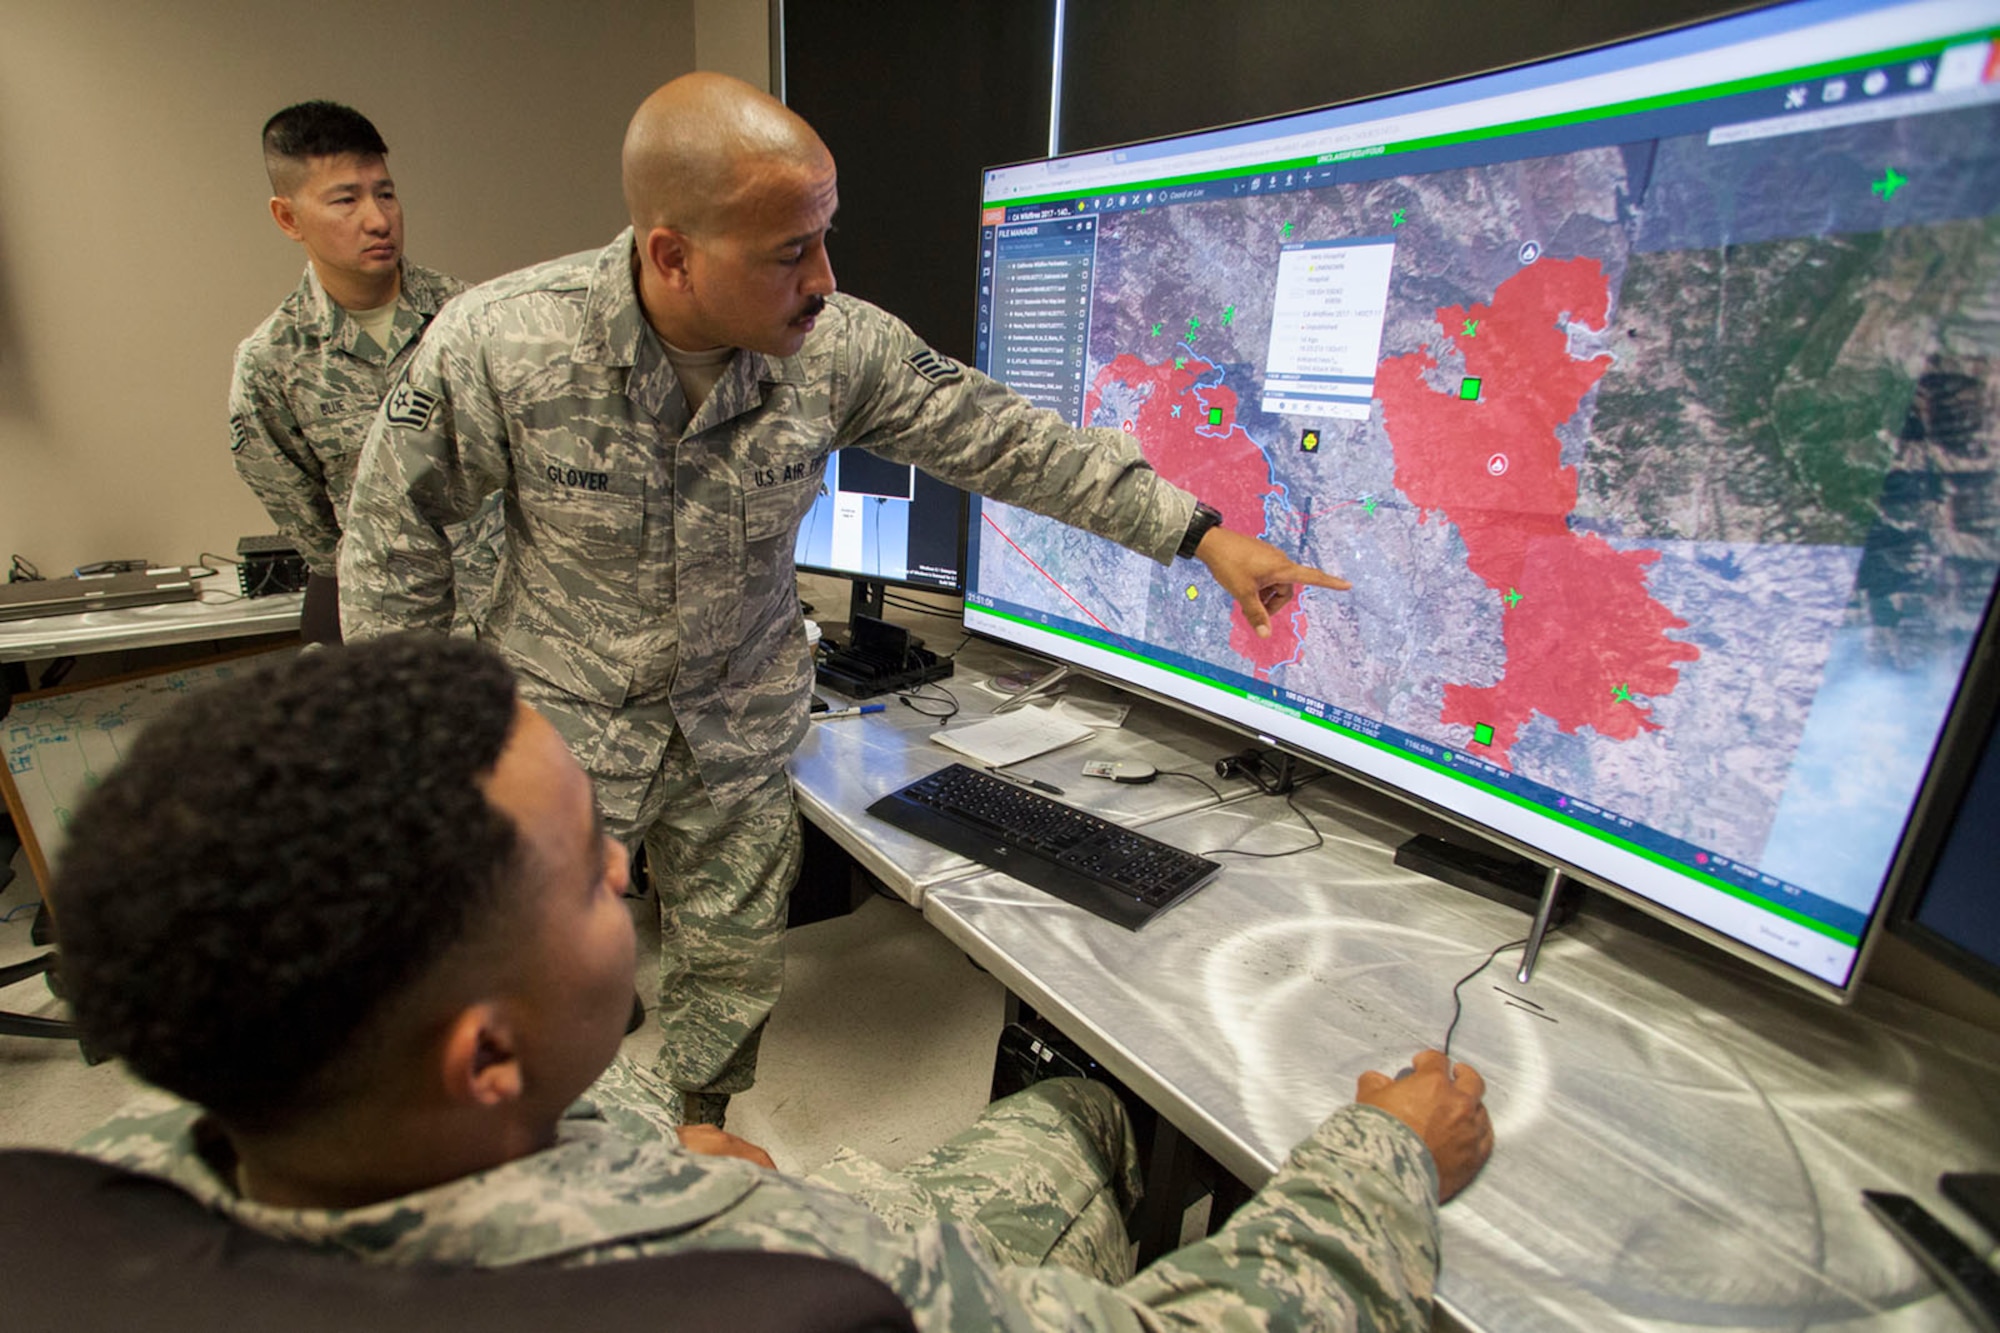 Staff Sgt. Richard Glover, 163d Attack Wing IT Specialist, shows burn areas to Staff Sgt. Jamel Seales (sitting) and Staff Sgt. Shawn Blue (background) on Saturday, Oct. 14, 2017, at the wing's Hap Arnold Center at March Air Reserve Base, California.